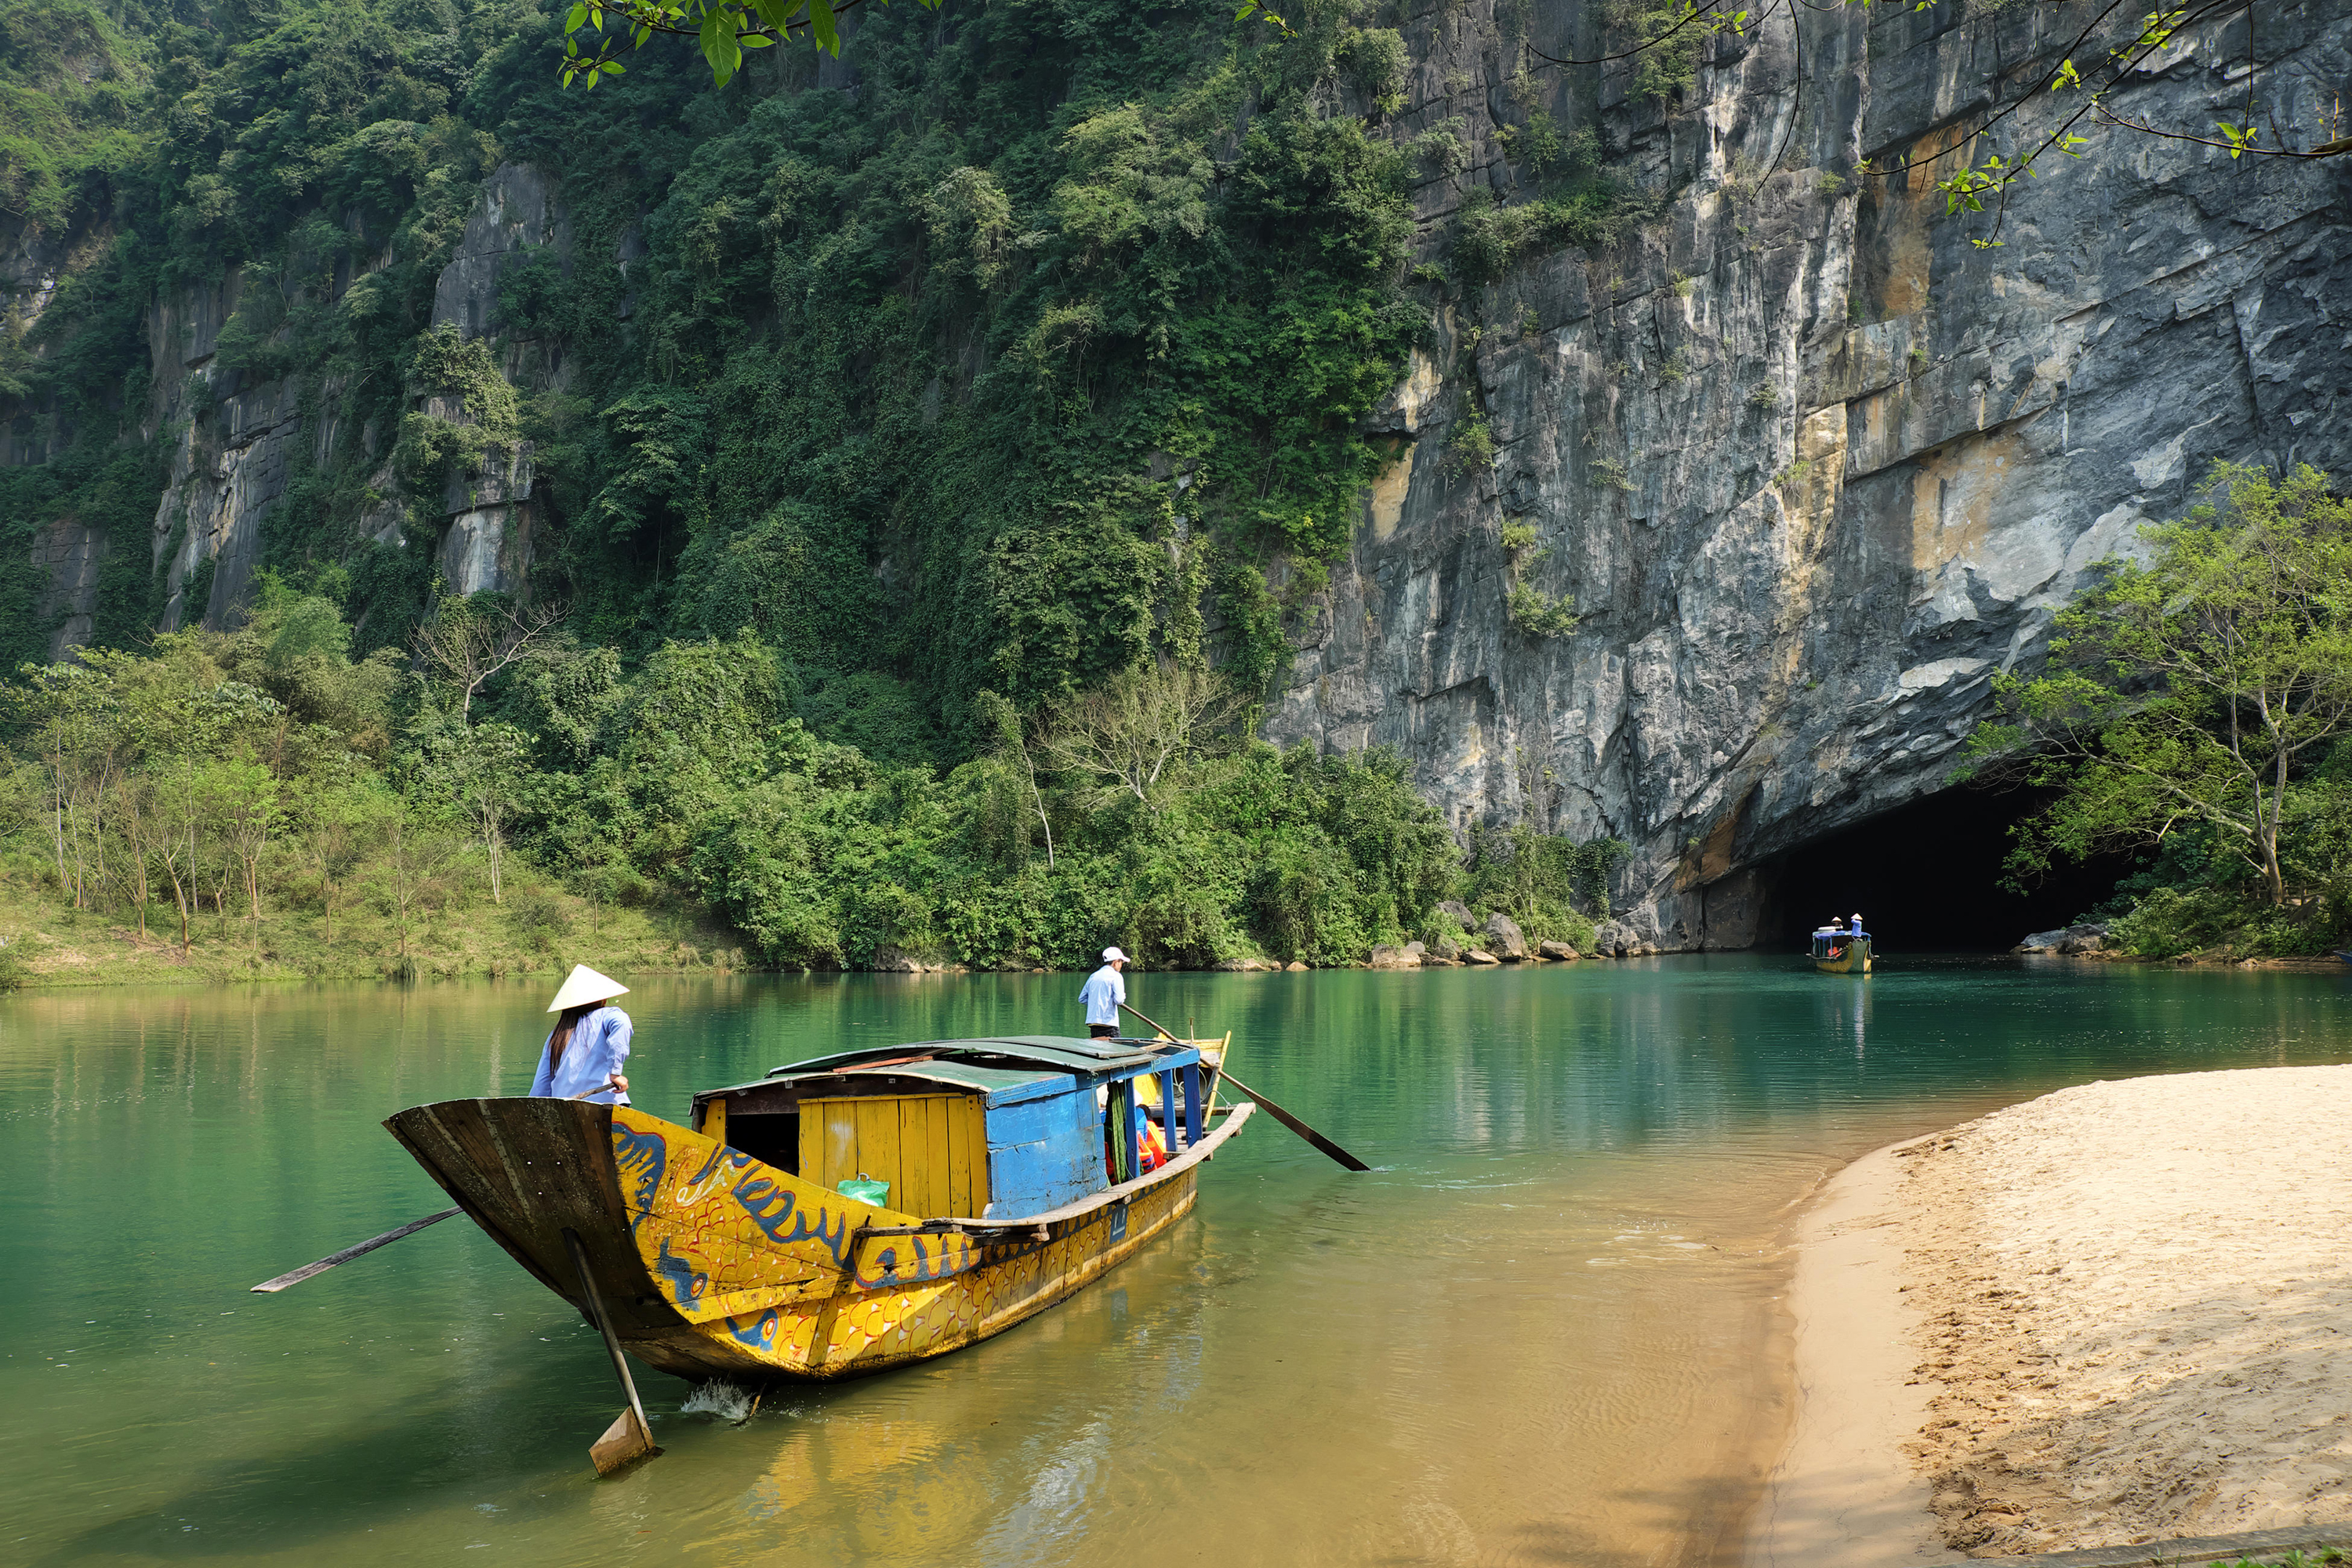 The entrance to Phong Nha cave